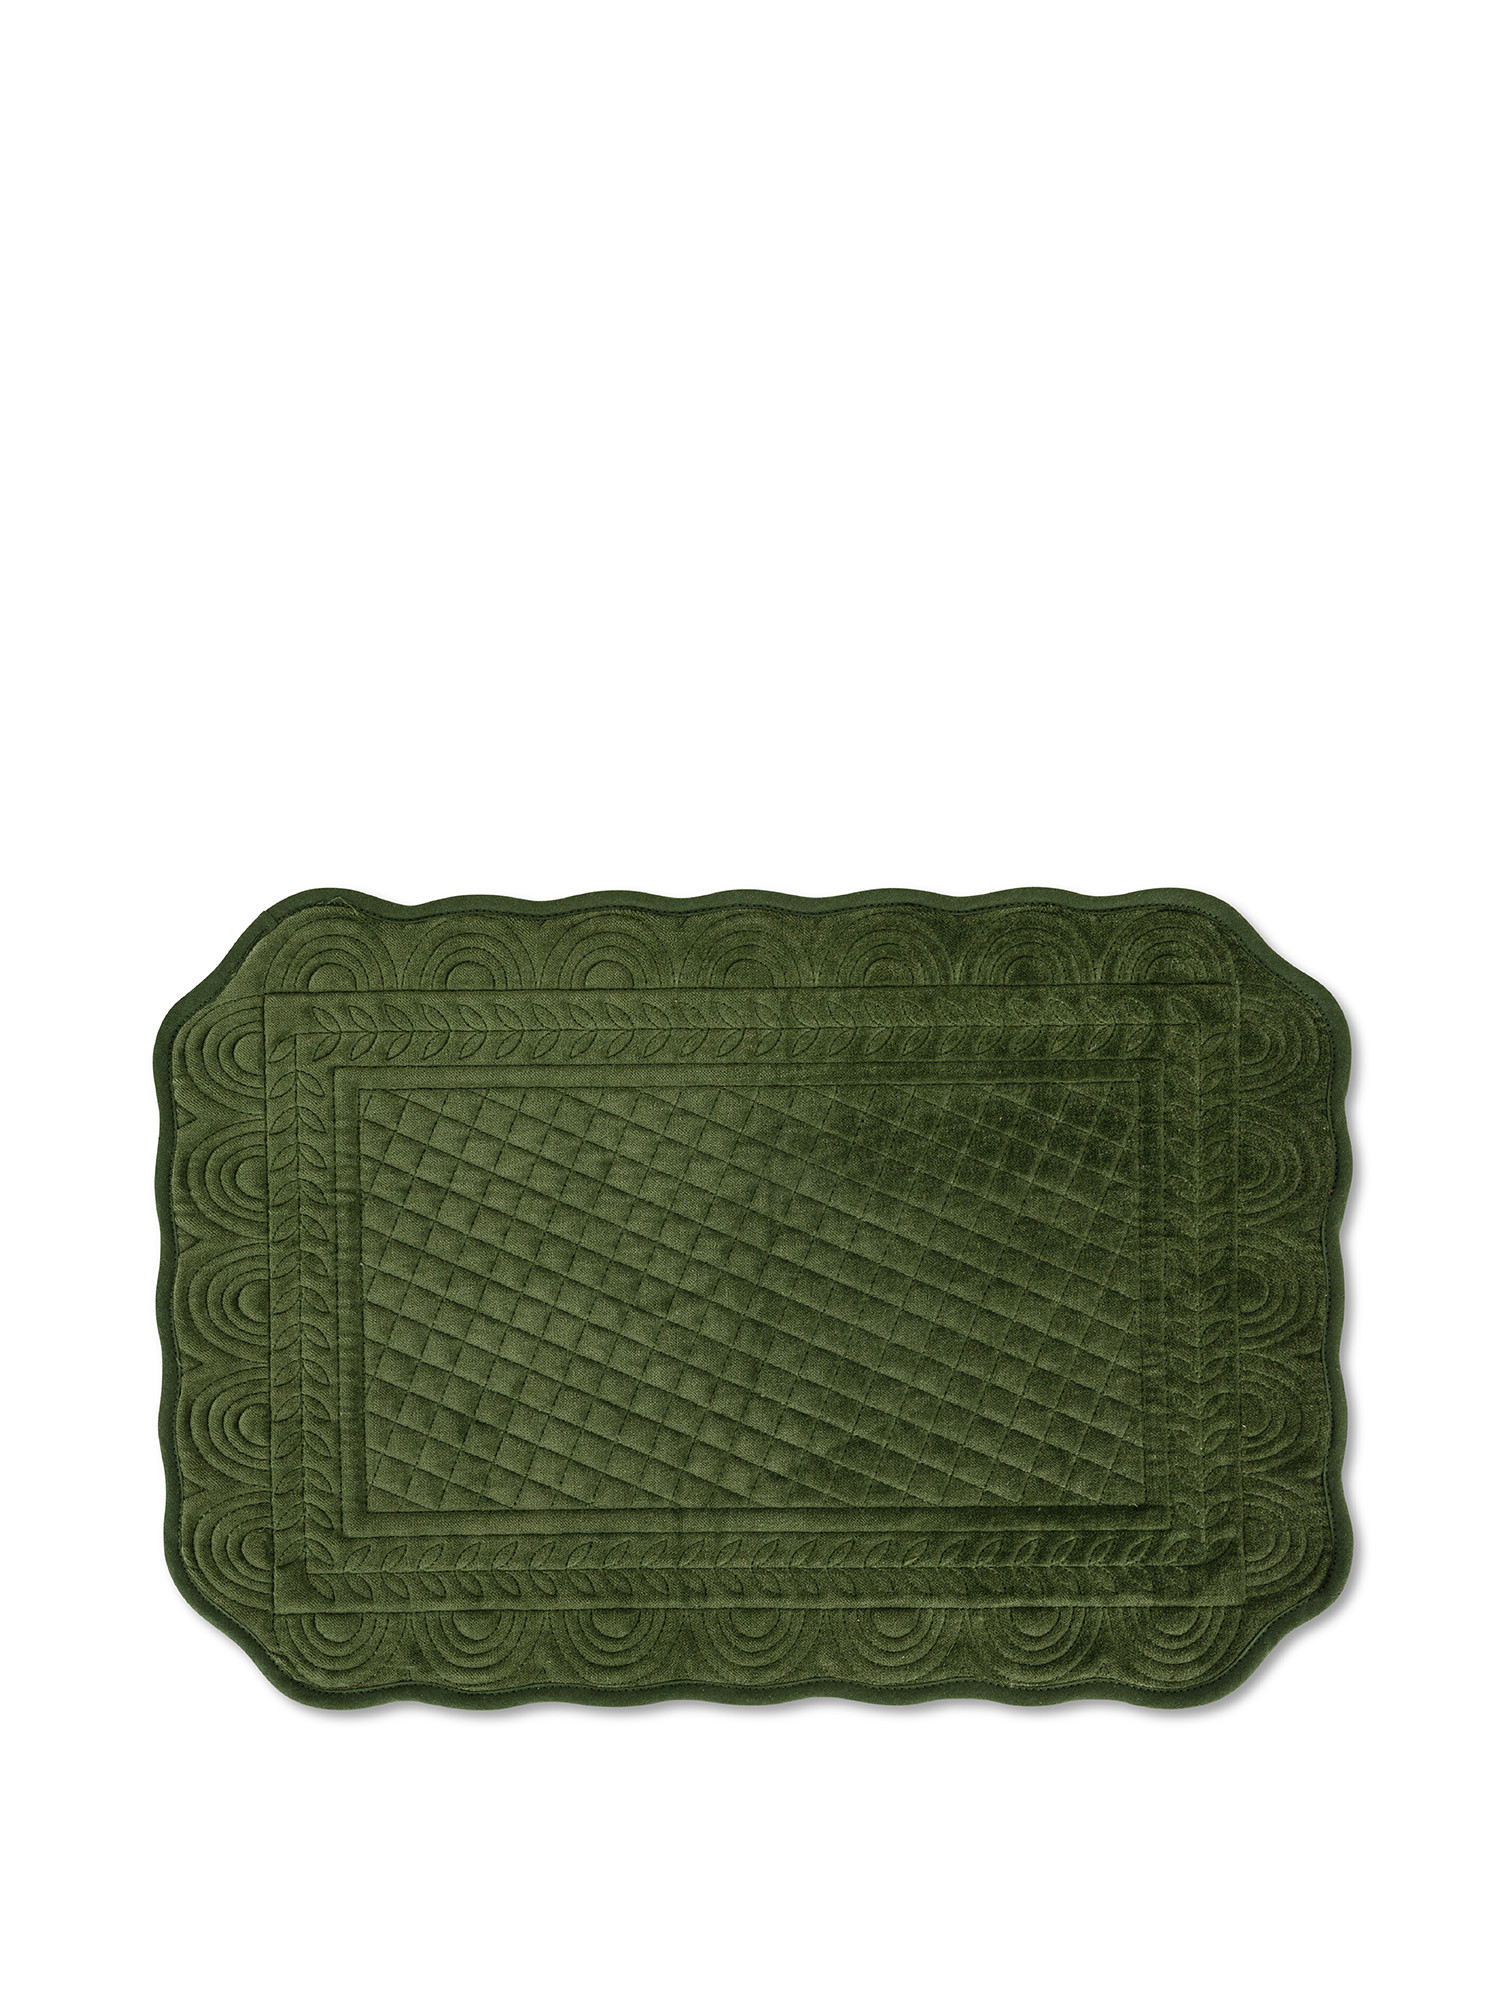 Plain color cotton velvet quilted placemat, Green, large image number 0